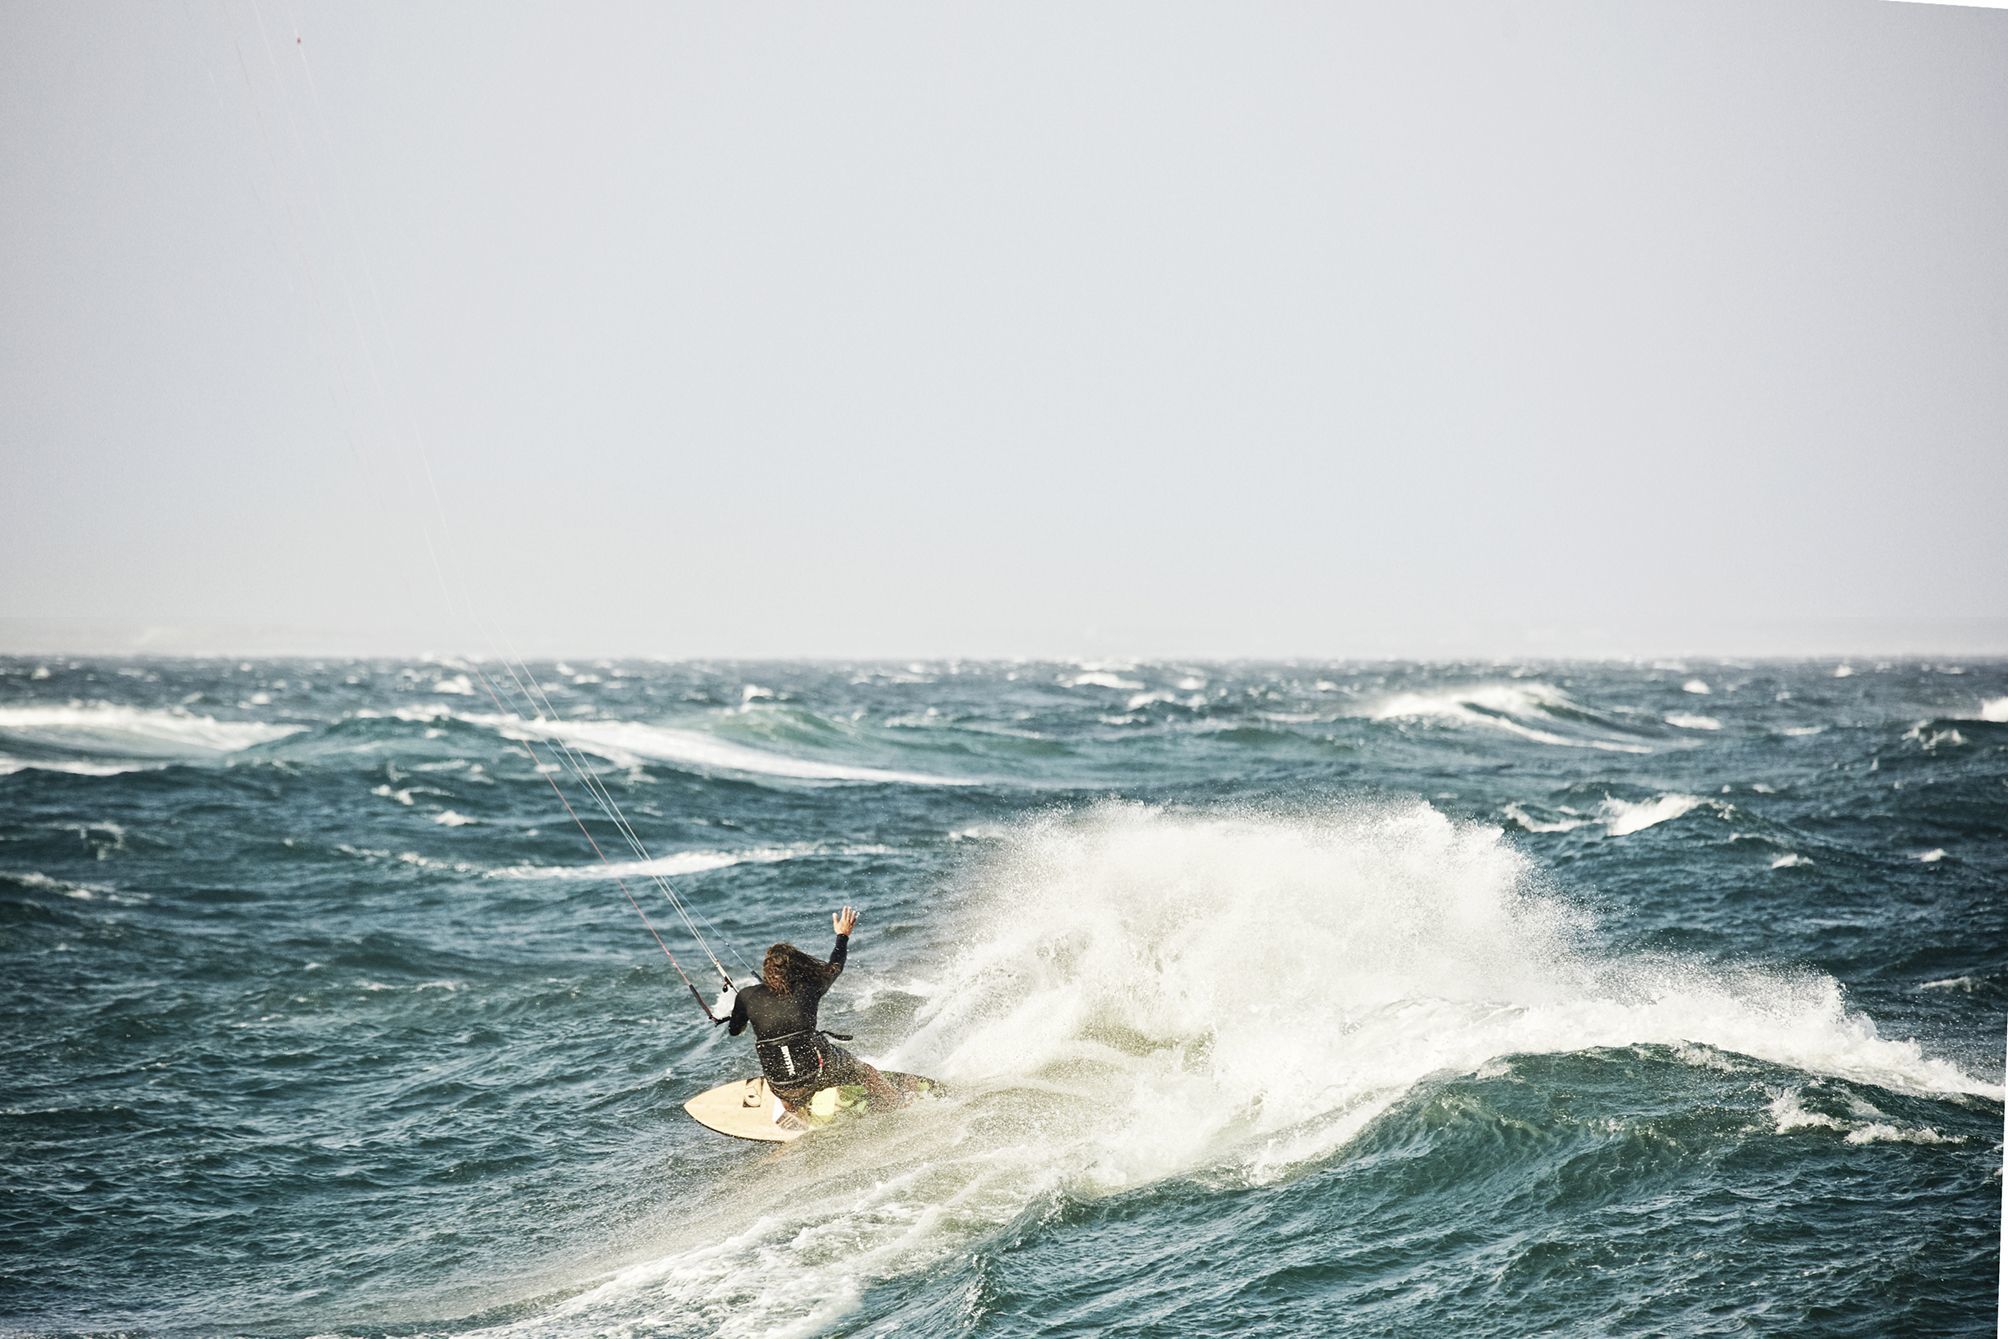 Kiter riding the waves in South africa